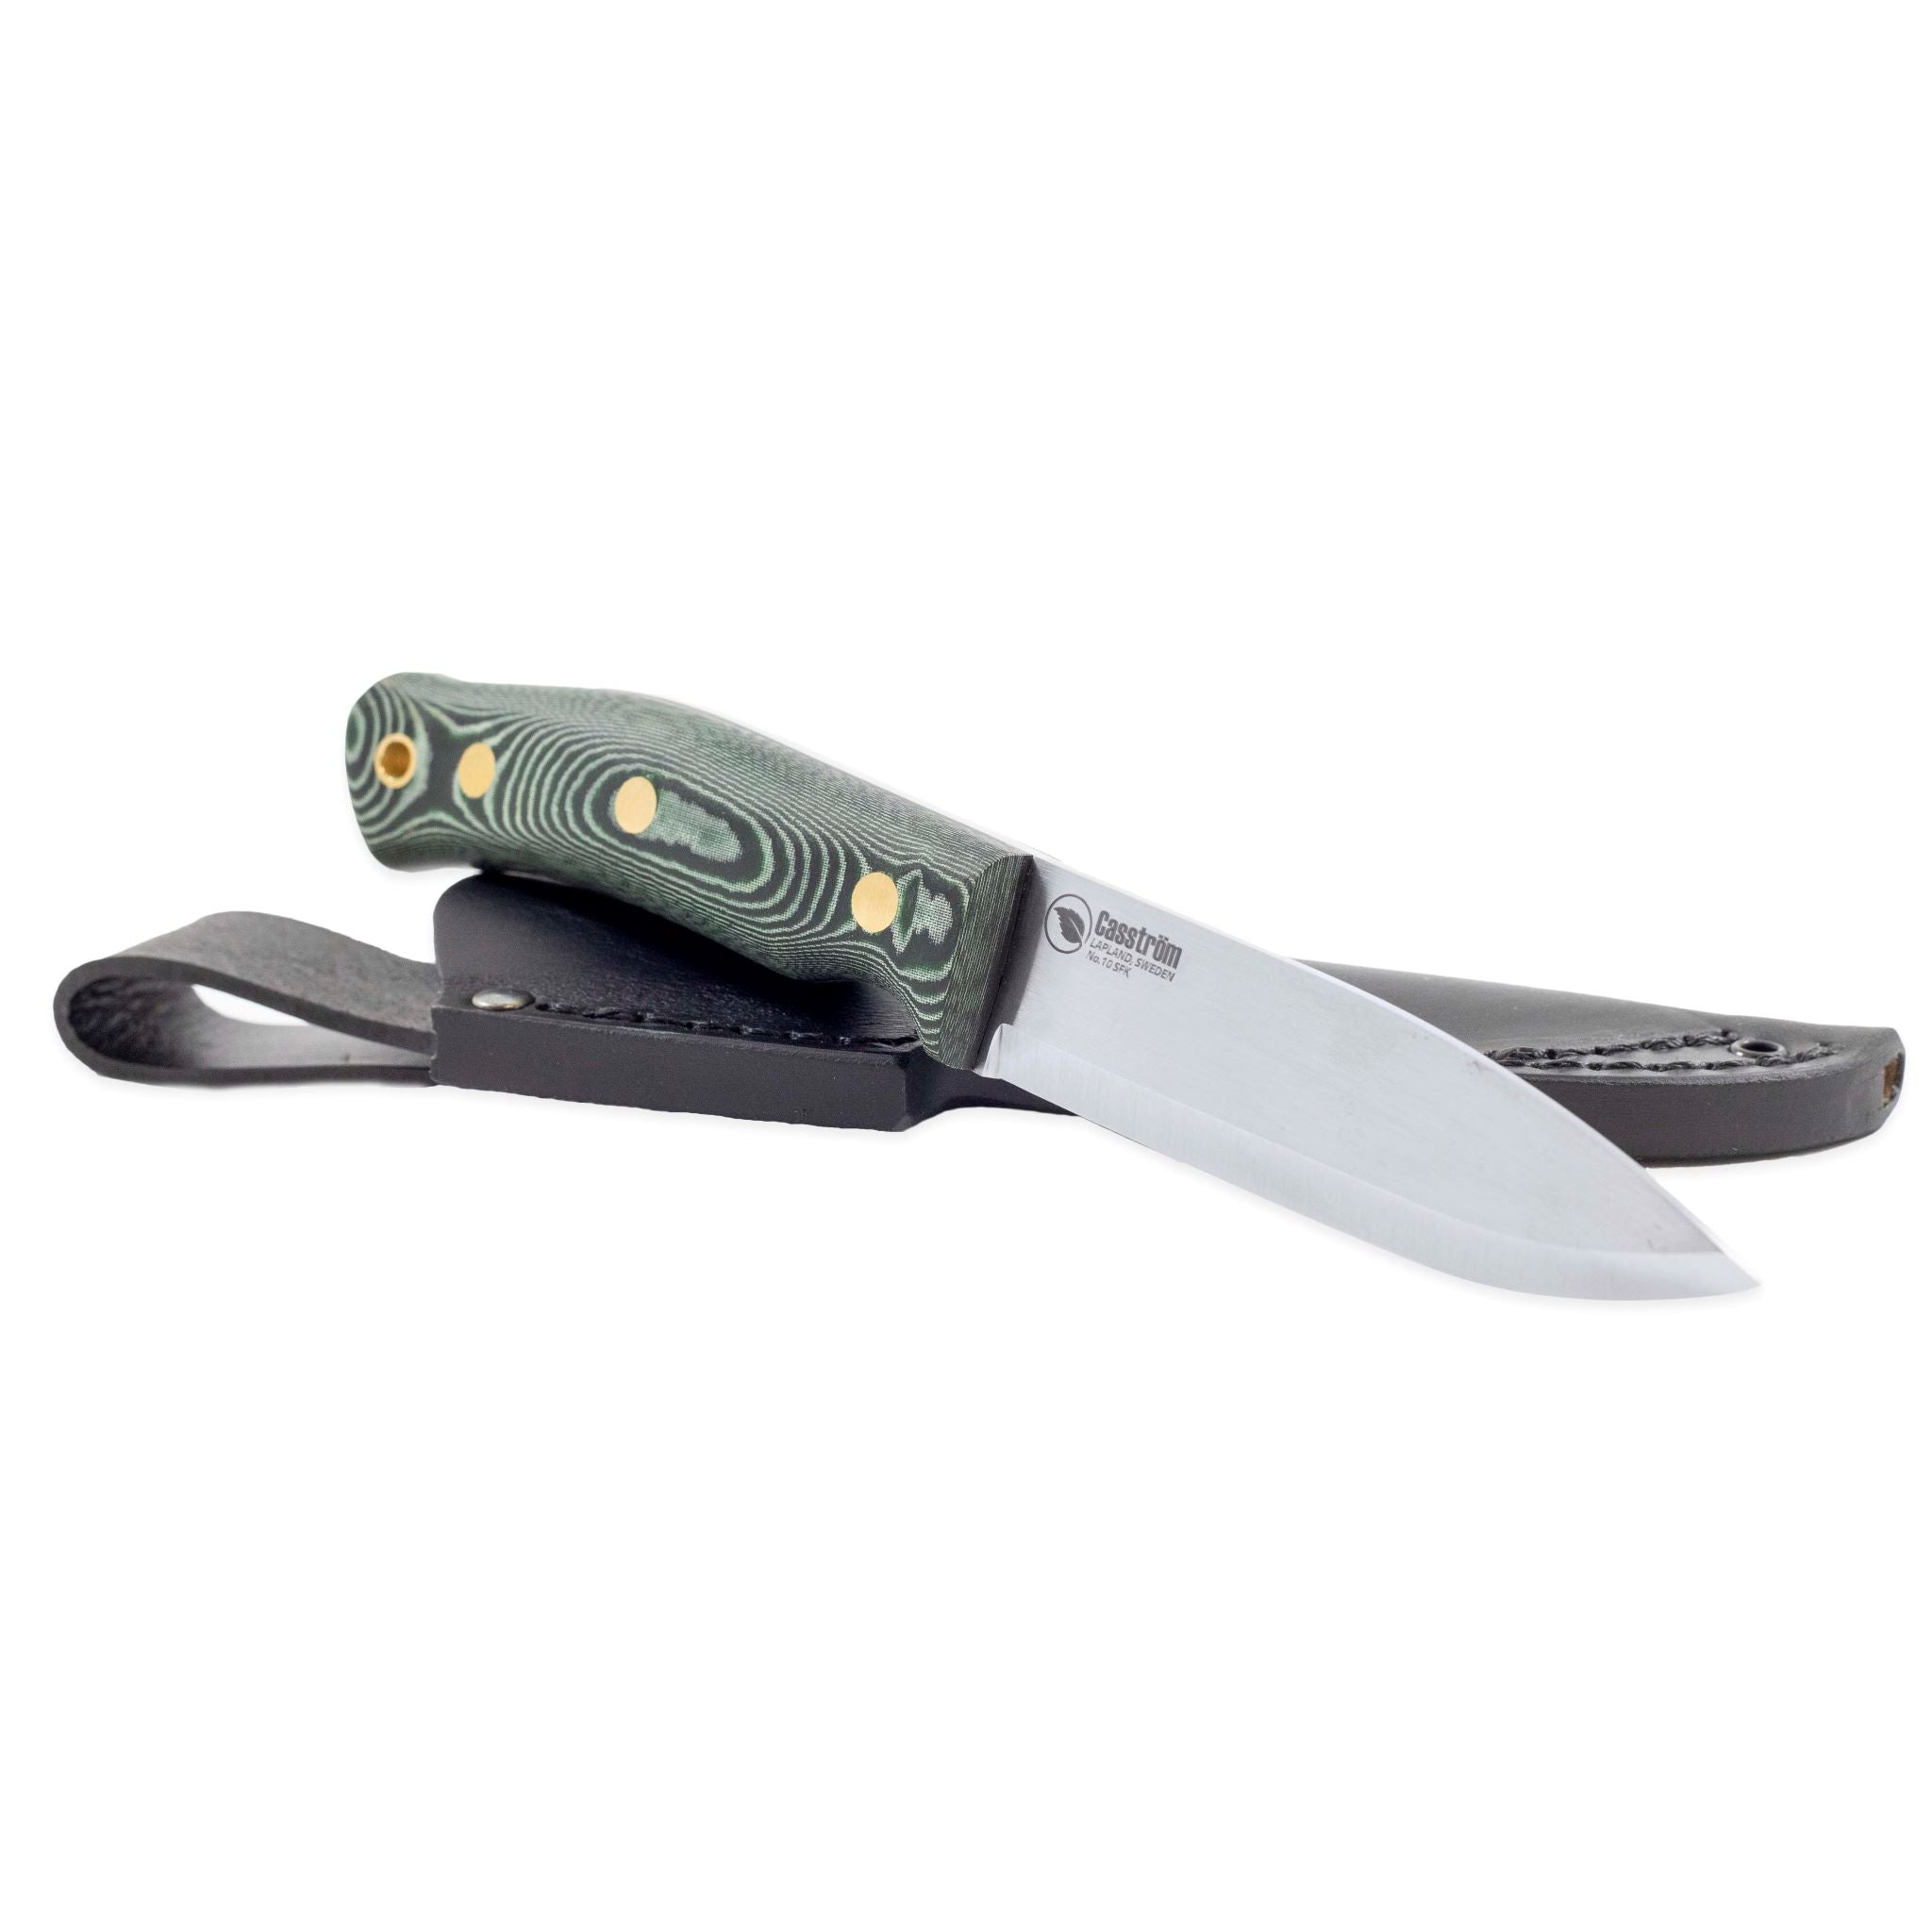 No.10 Swedish Forest Knife in Green Micarta – Casstrom Limited